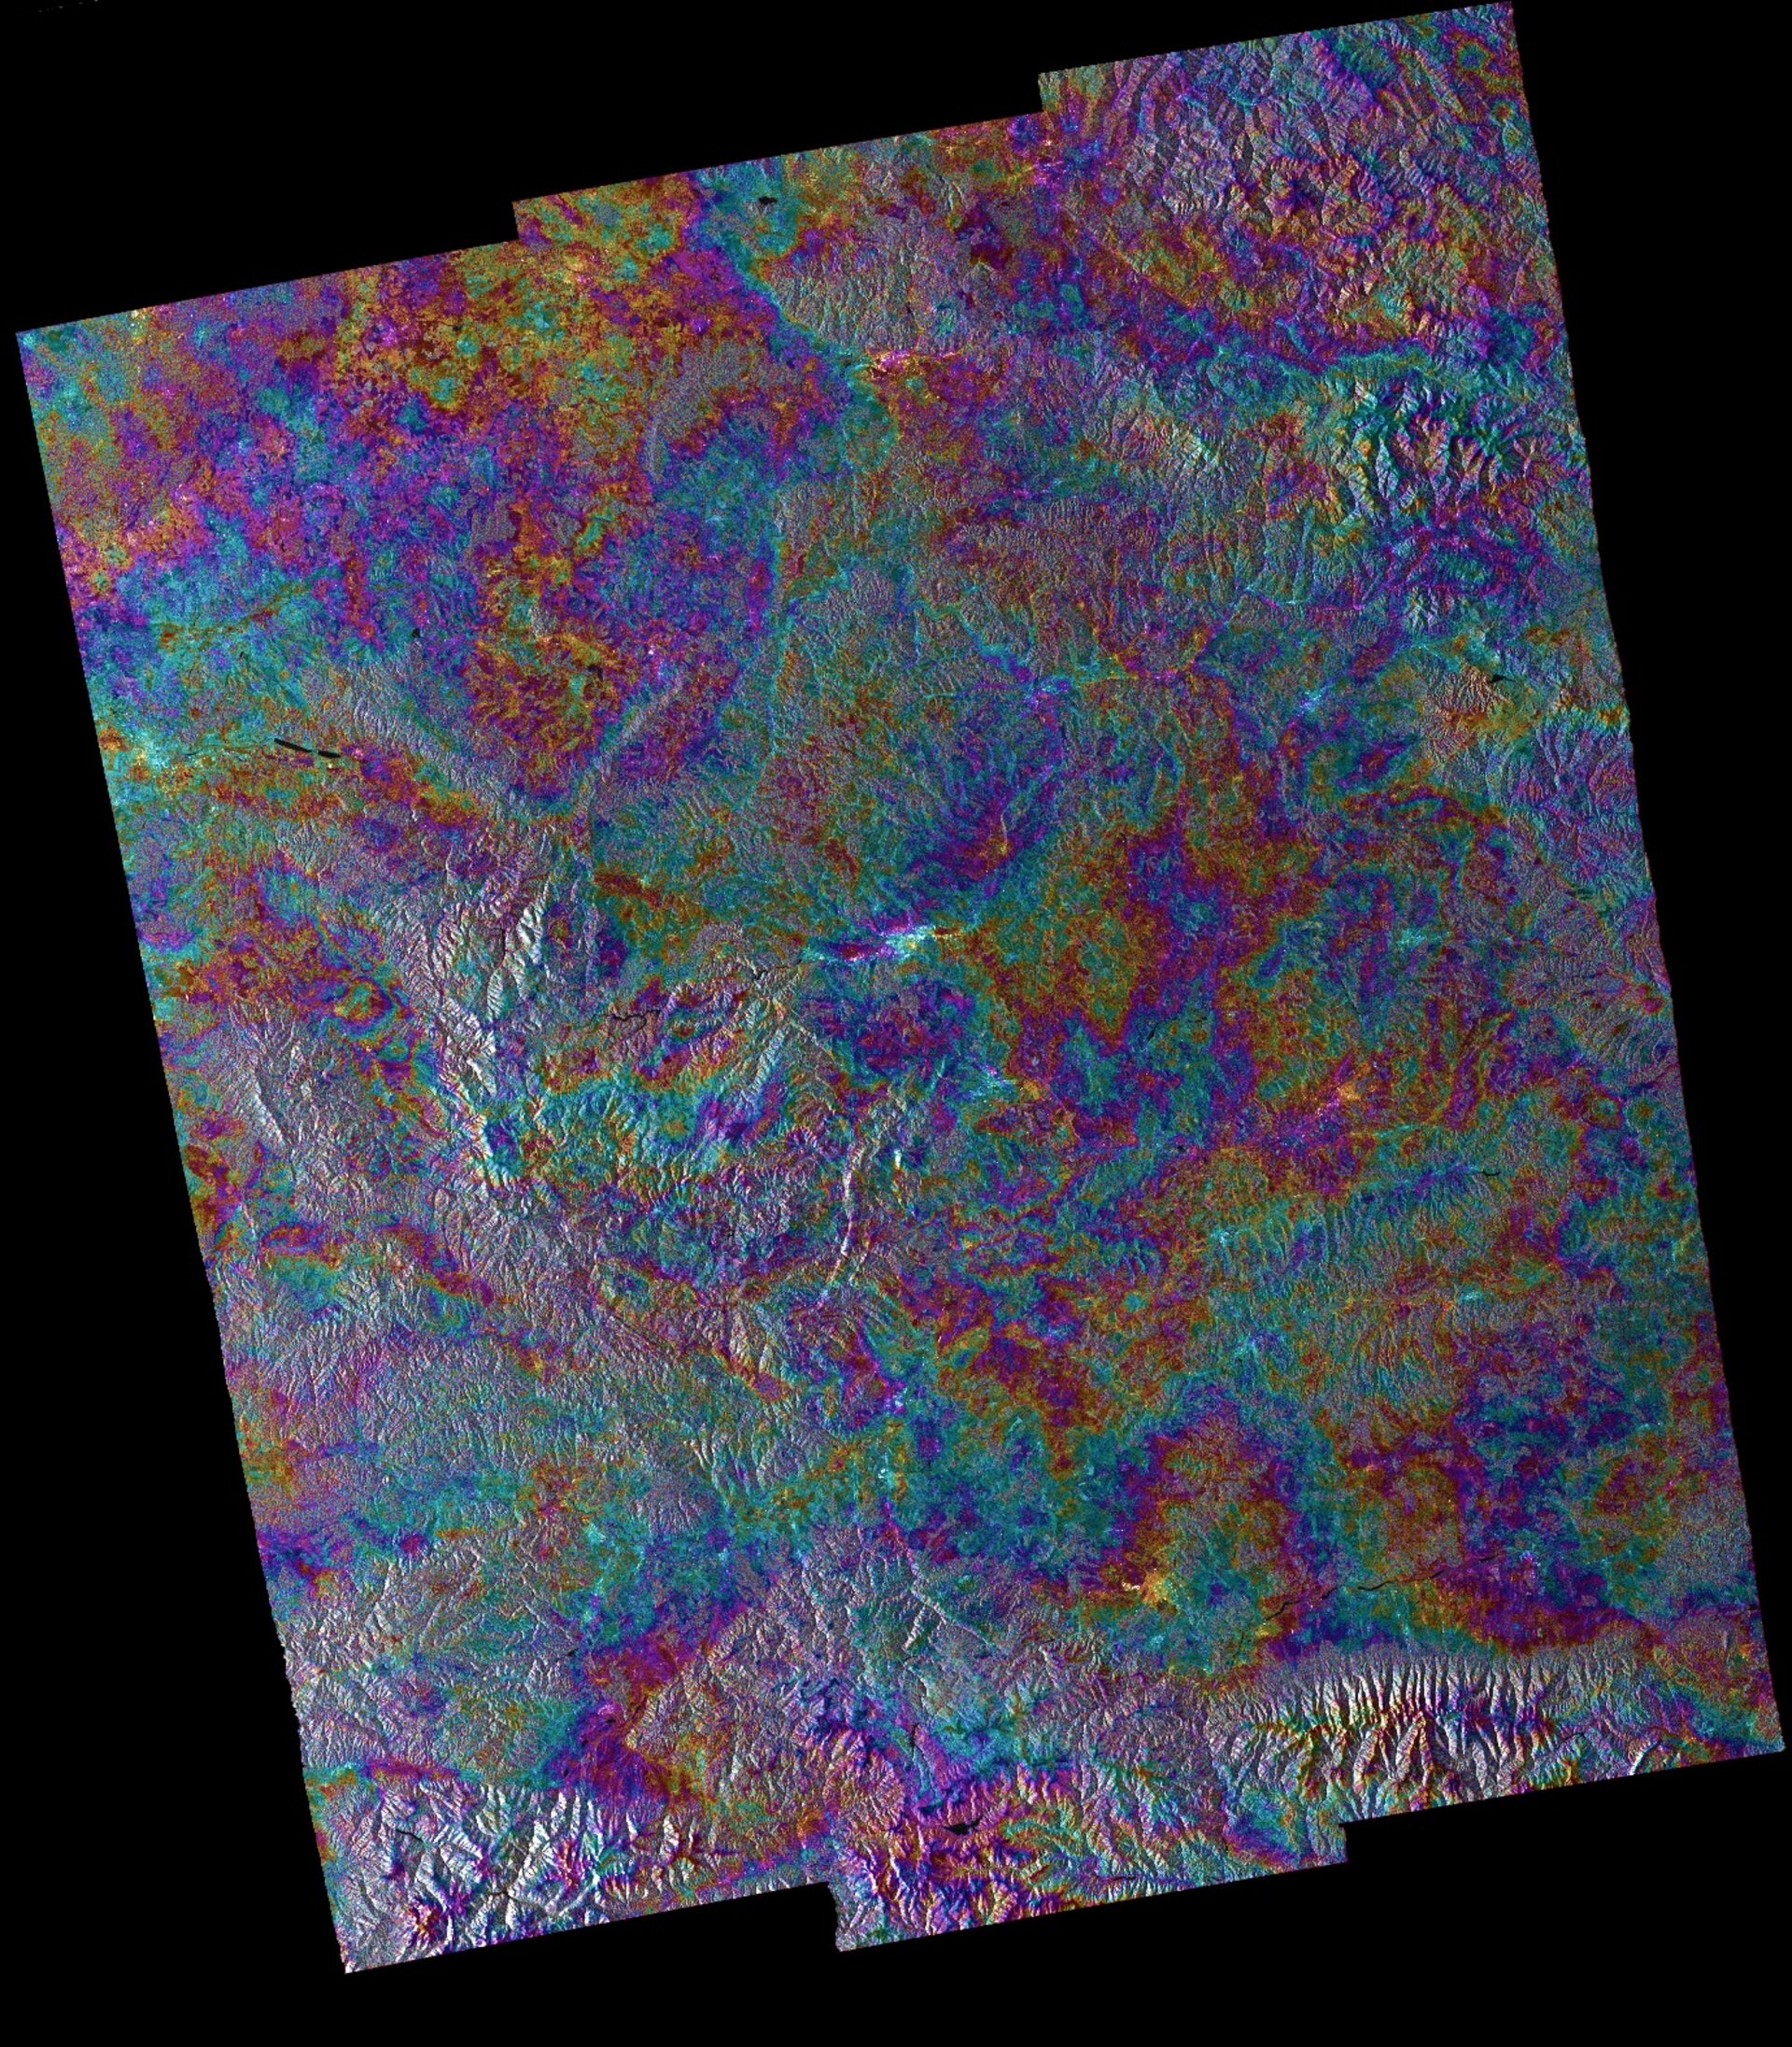 Sentinel-1A and -1B radar scans combined